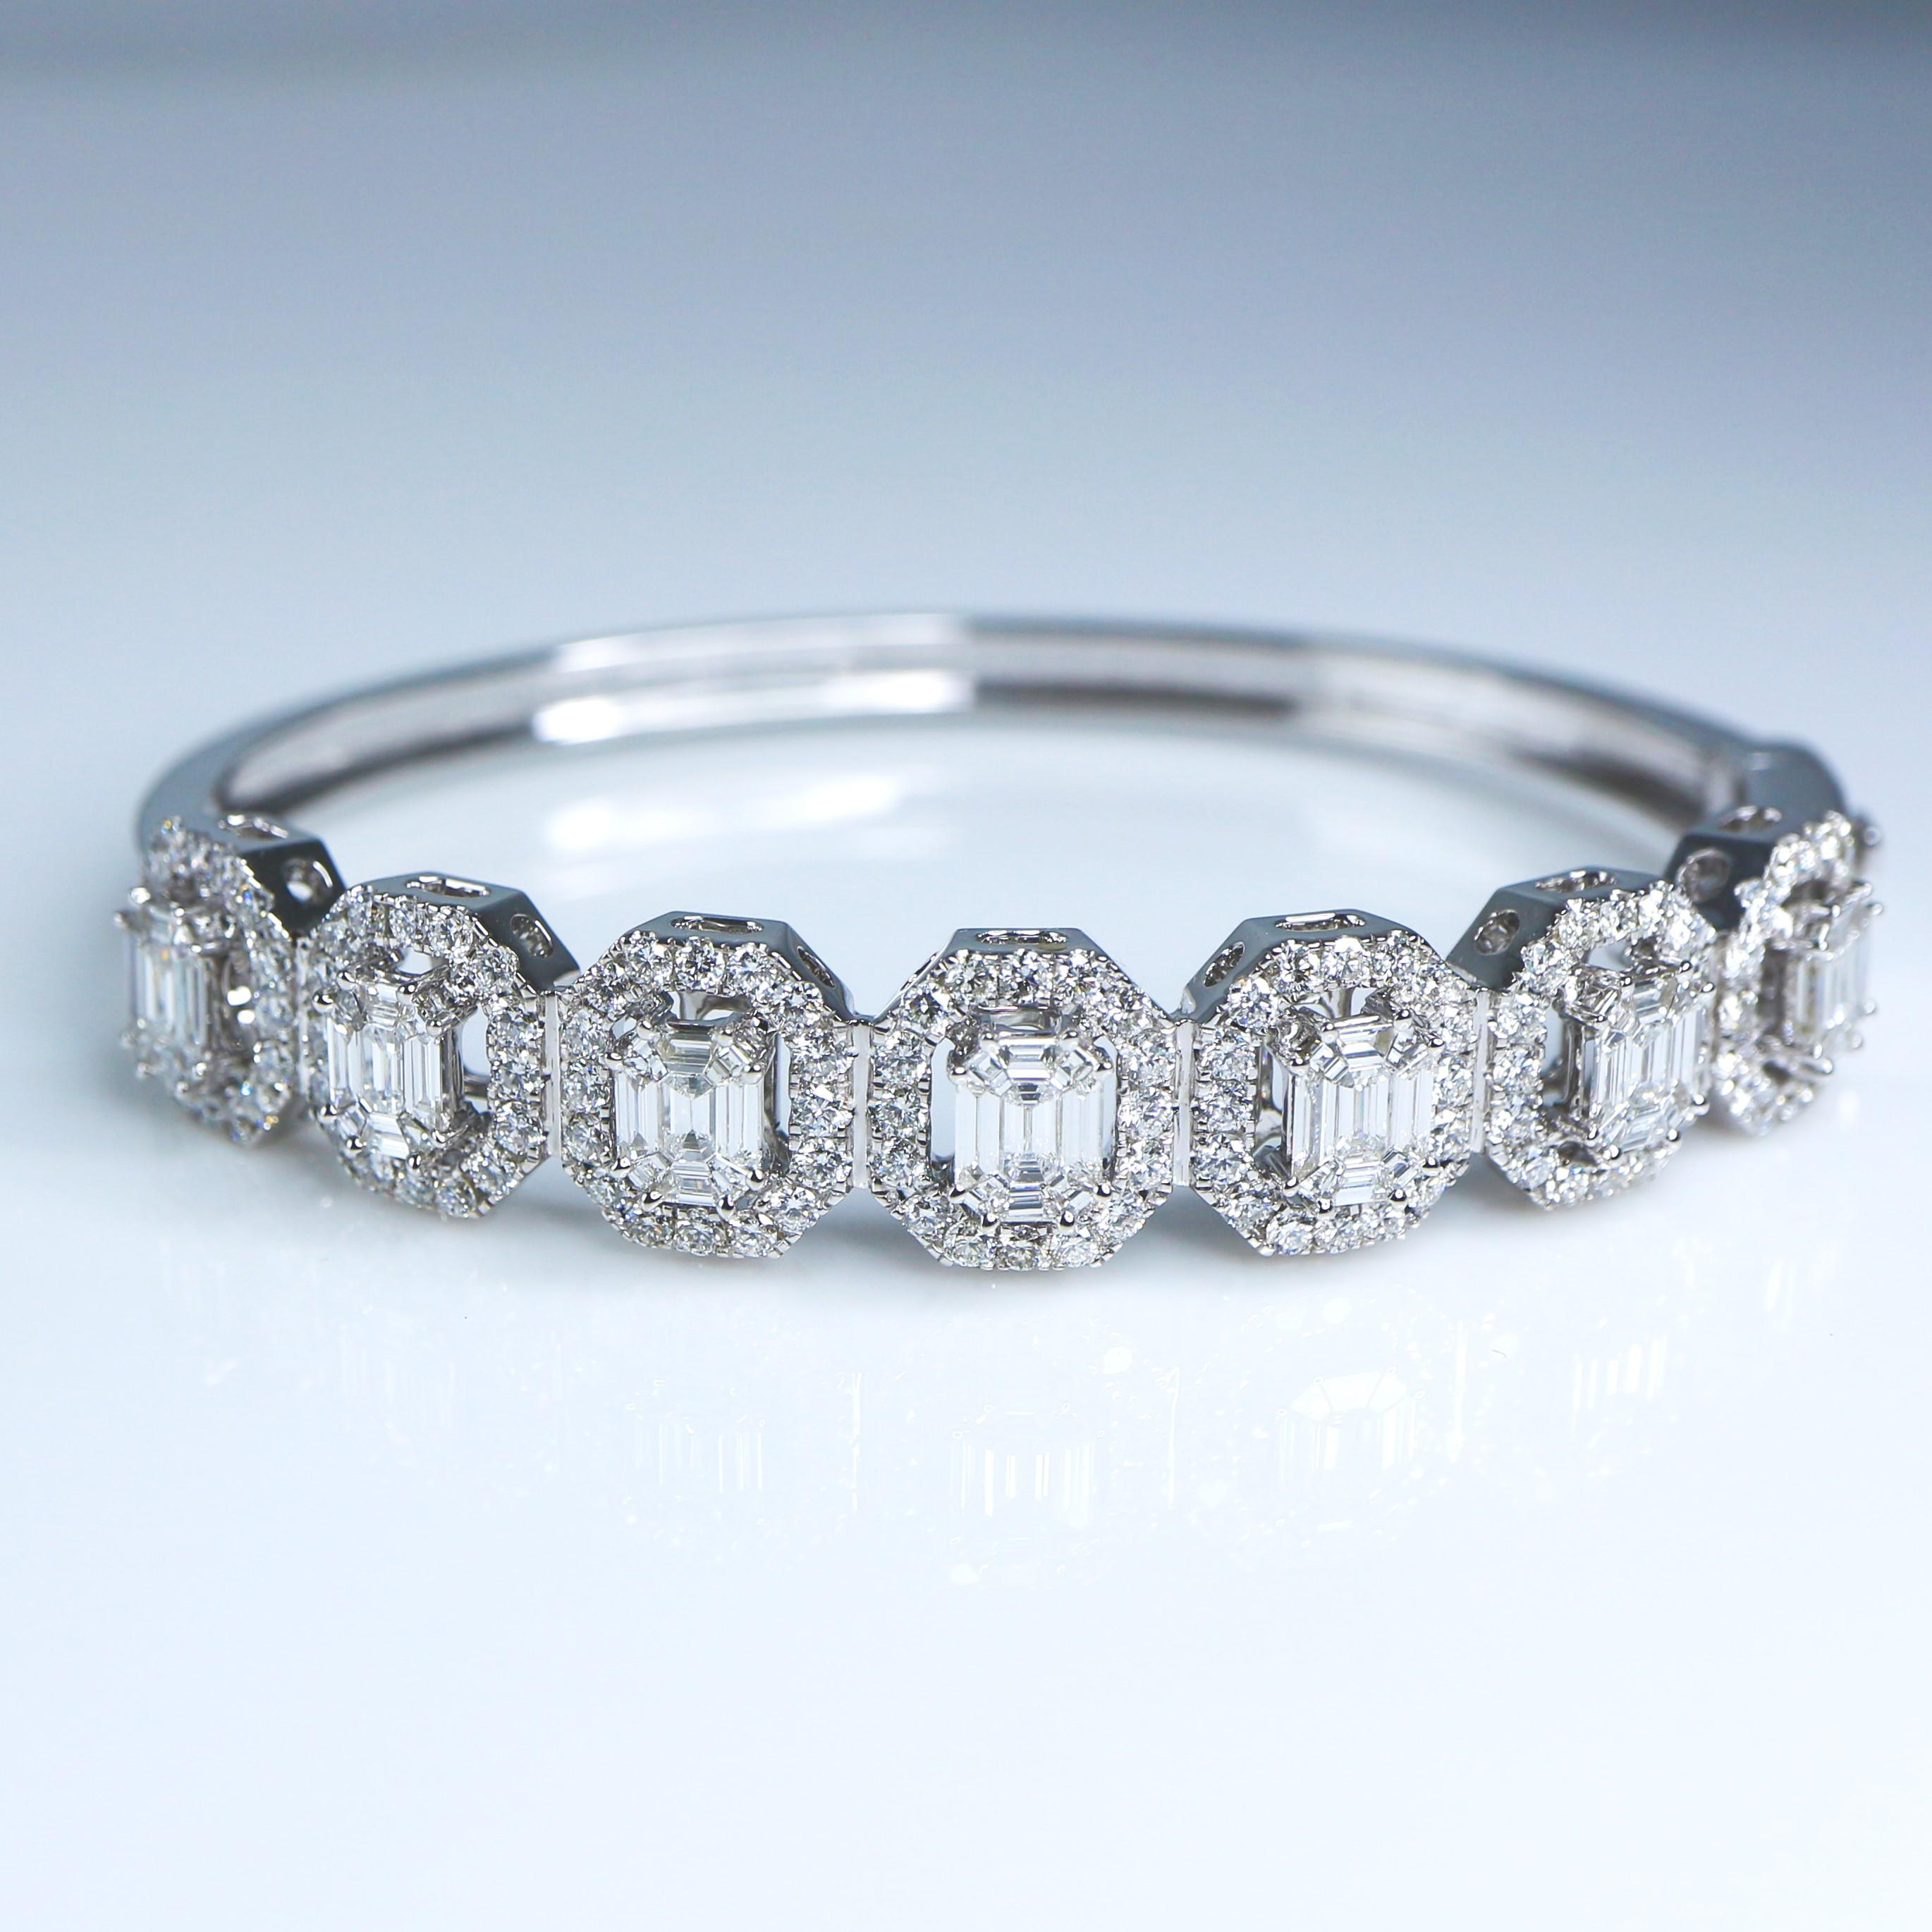 ** IGI 14K 3.92 Ct Diamond Antique Art Deco Bangle Bracelet **

IGI-Certified natural 63 pieces of FG VS illusion diamonds weighing 1.80 ct surrounded with natural round brilliant diamonds weighing 2.12 ct on the 14K white gold band. 

The invisible